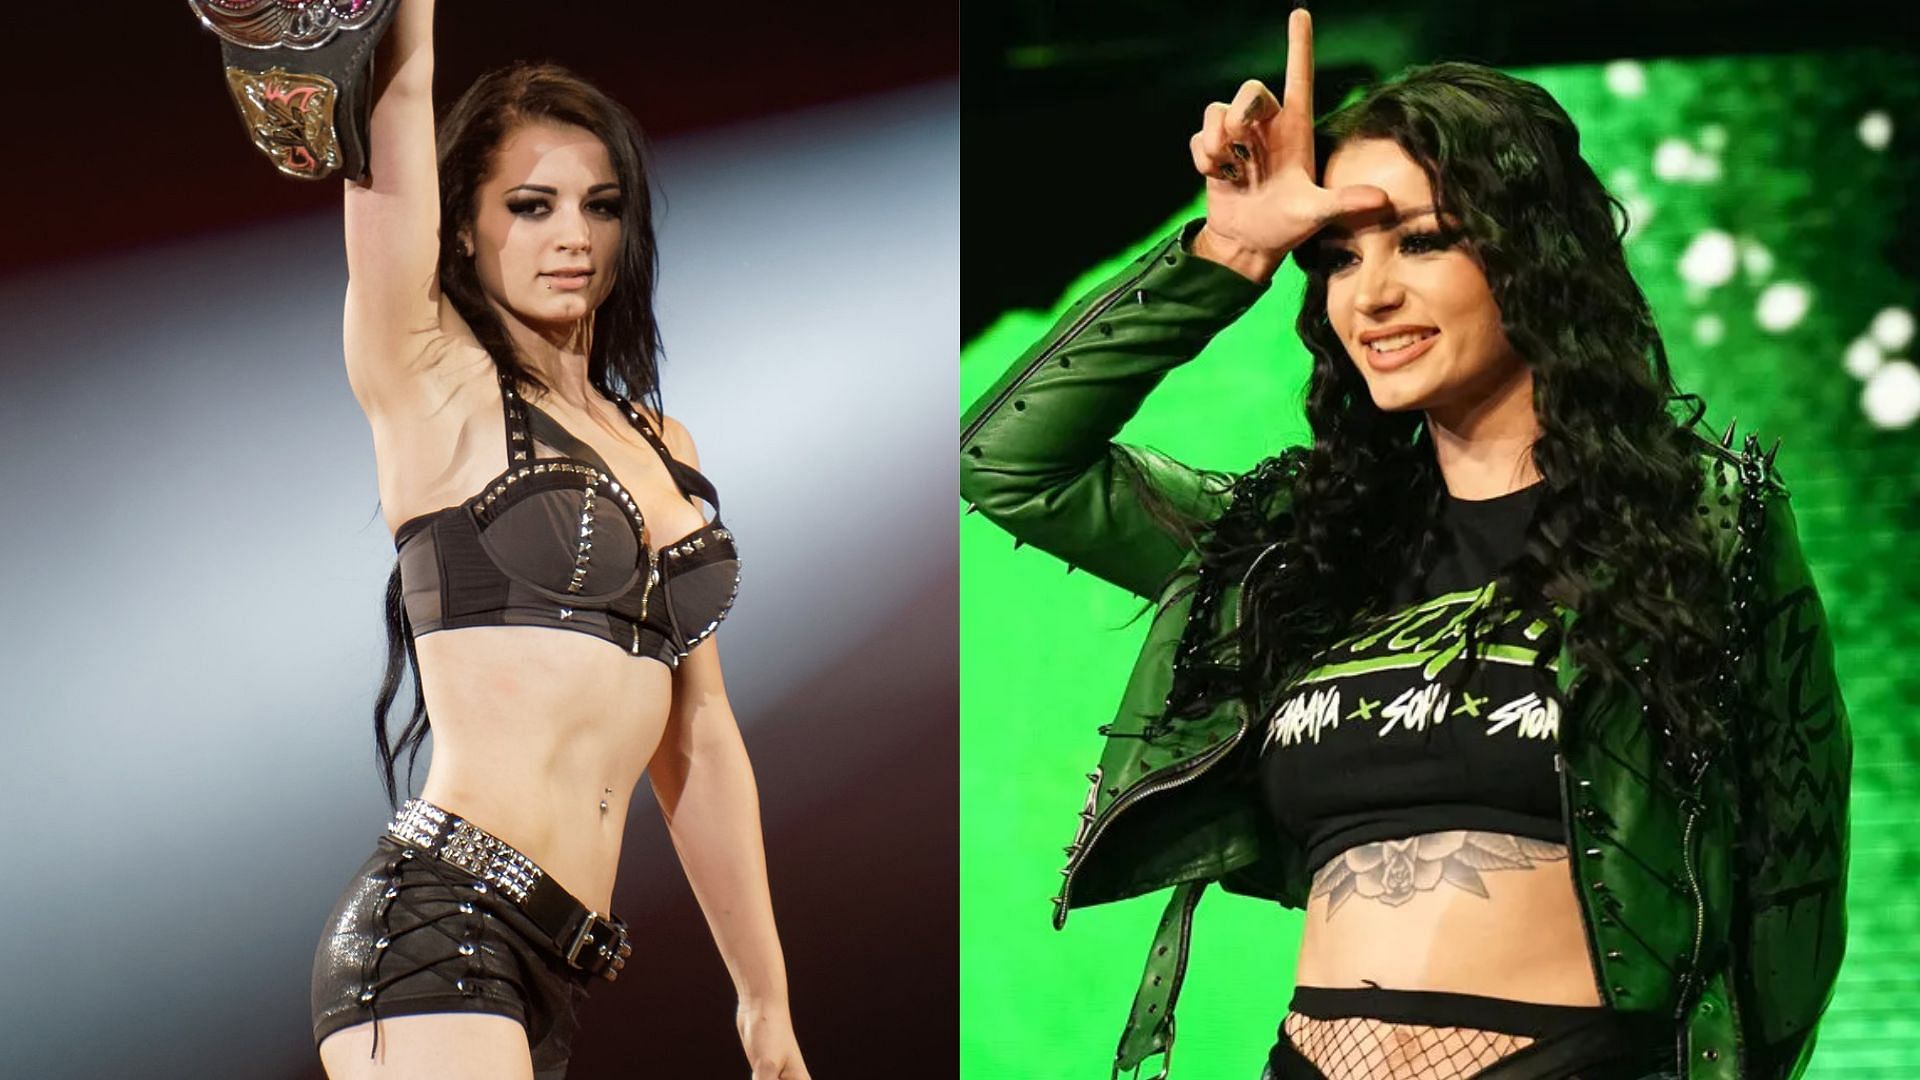 Was Saraya better in WWE as Paige?